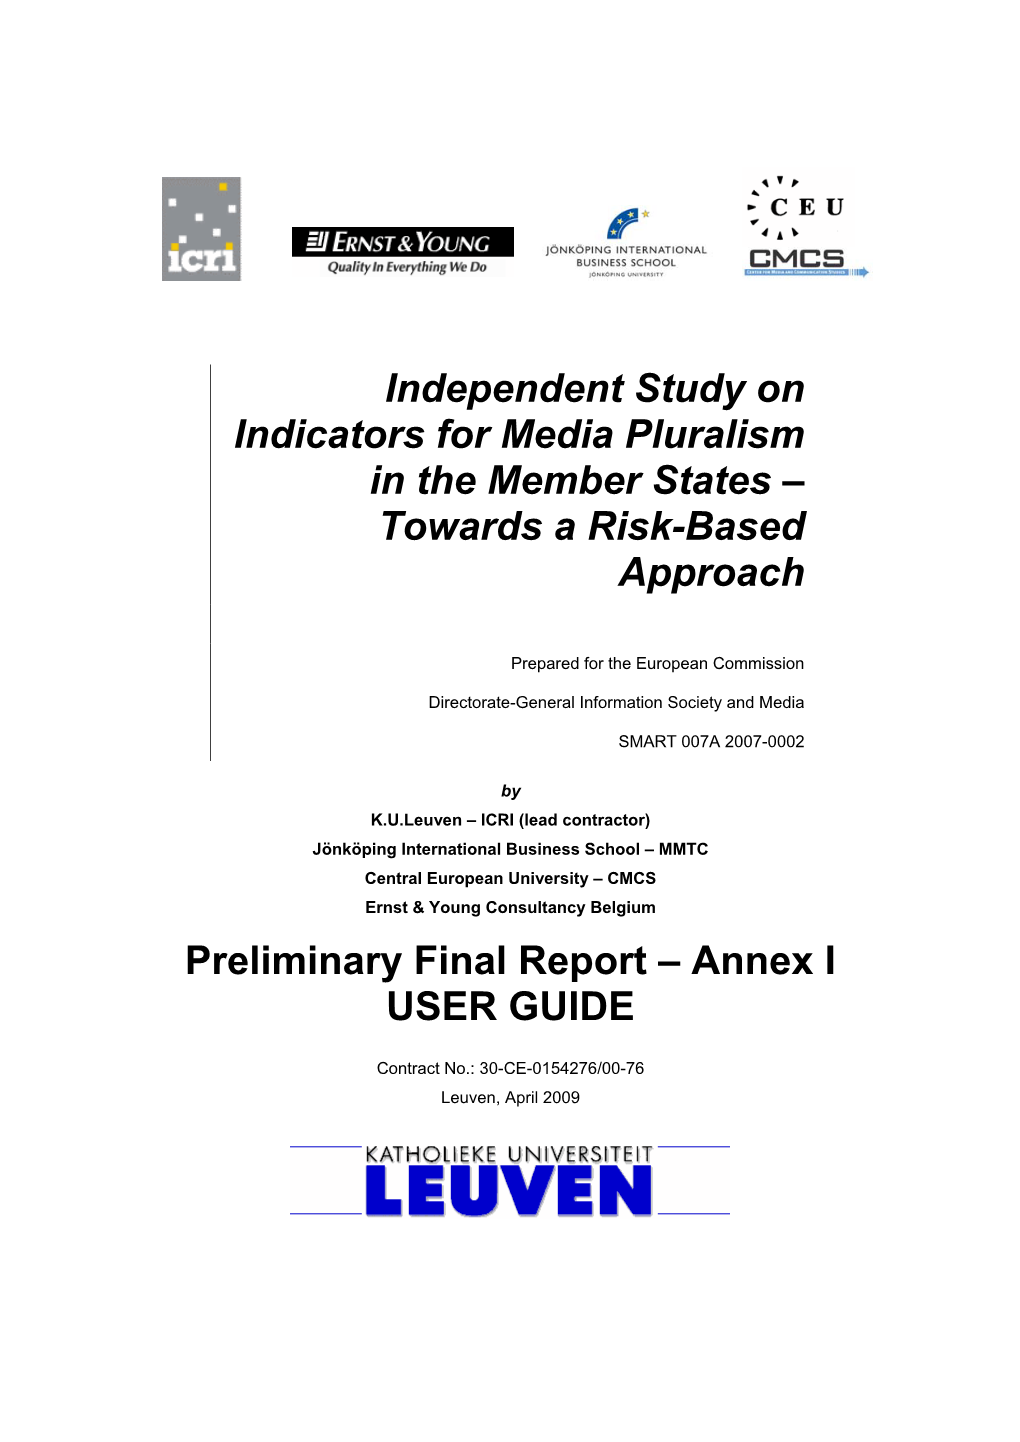 Independent Study on Indicators for Media Pluralism in the Member States – Towards a Risk-Based